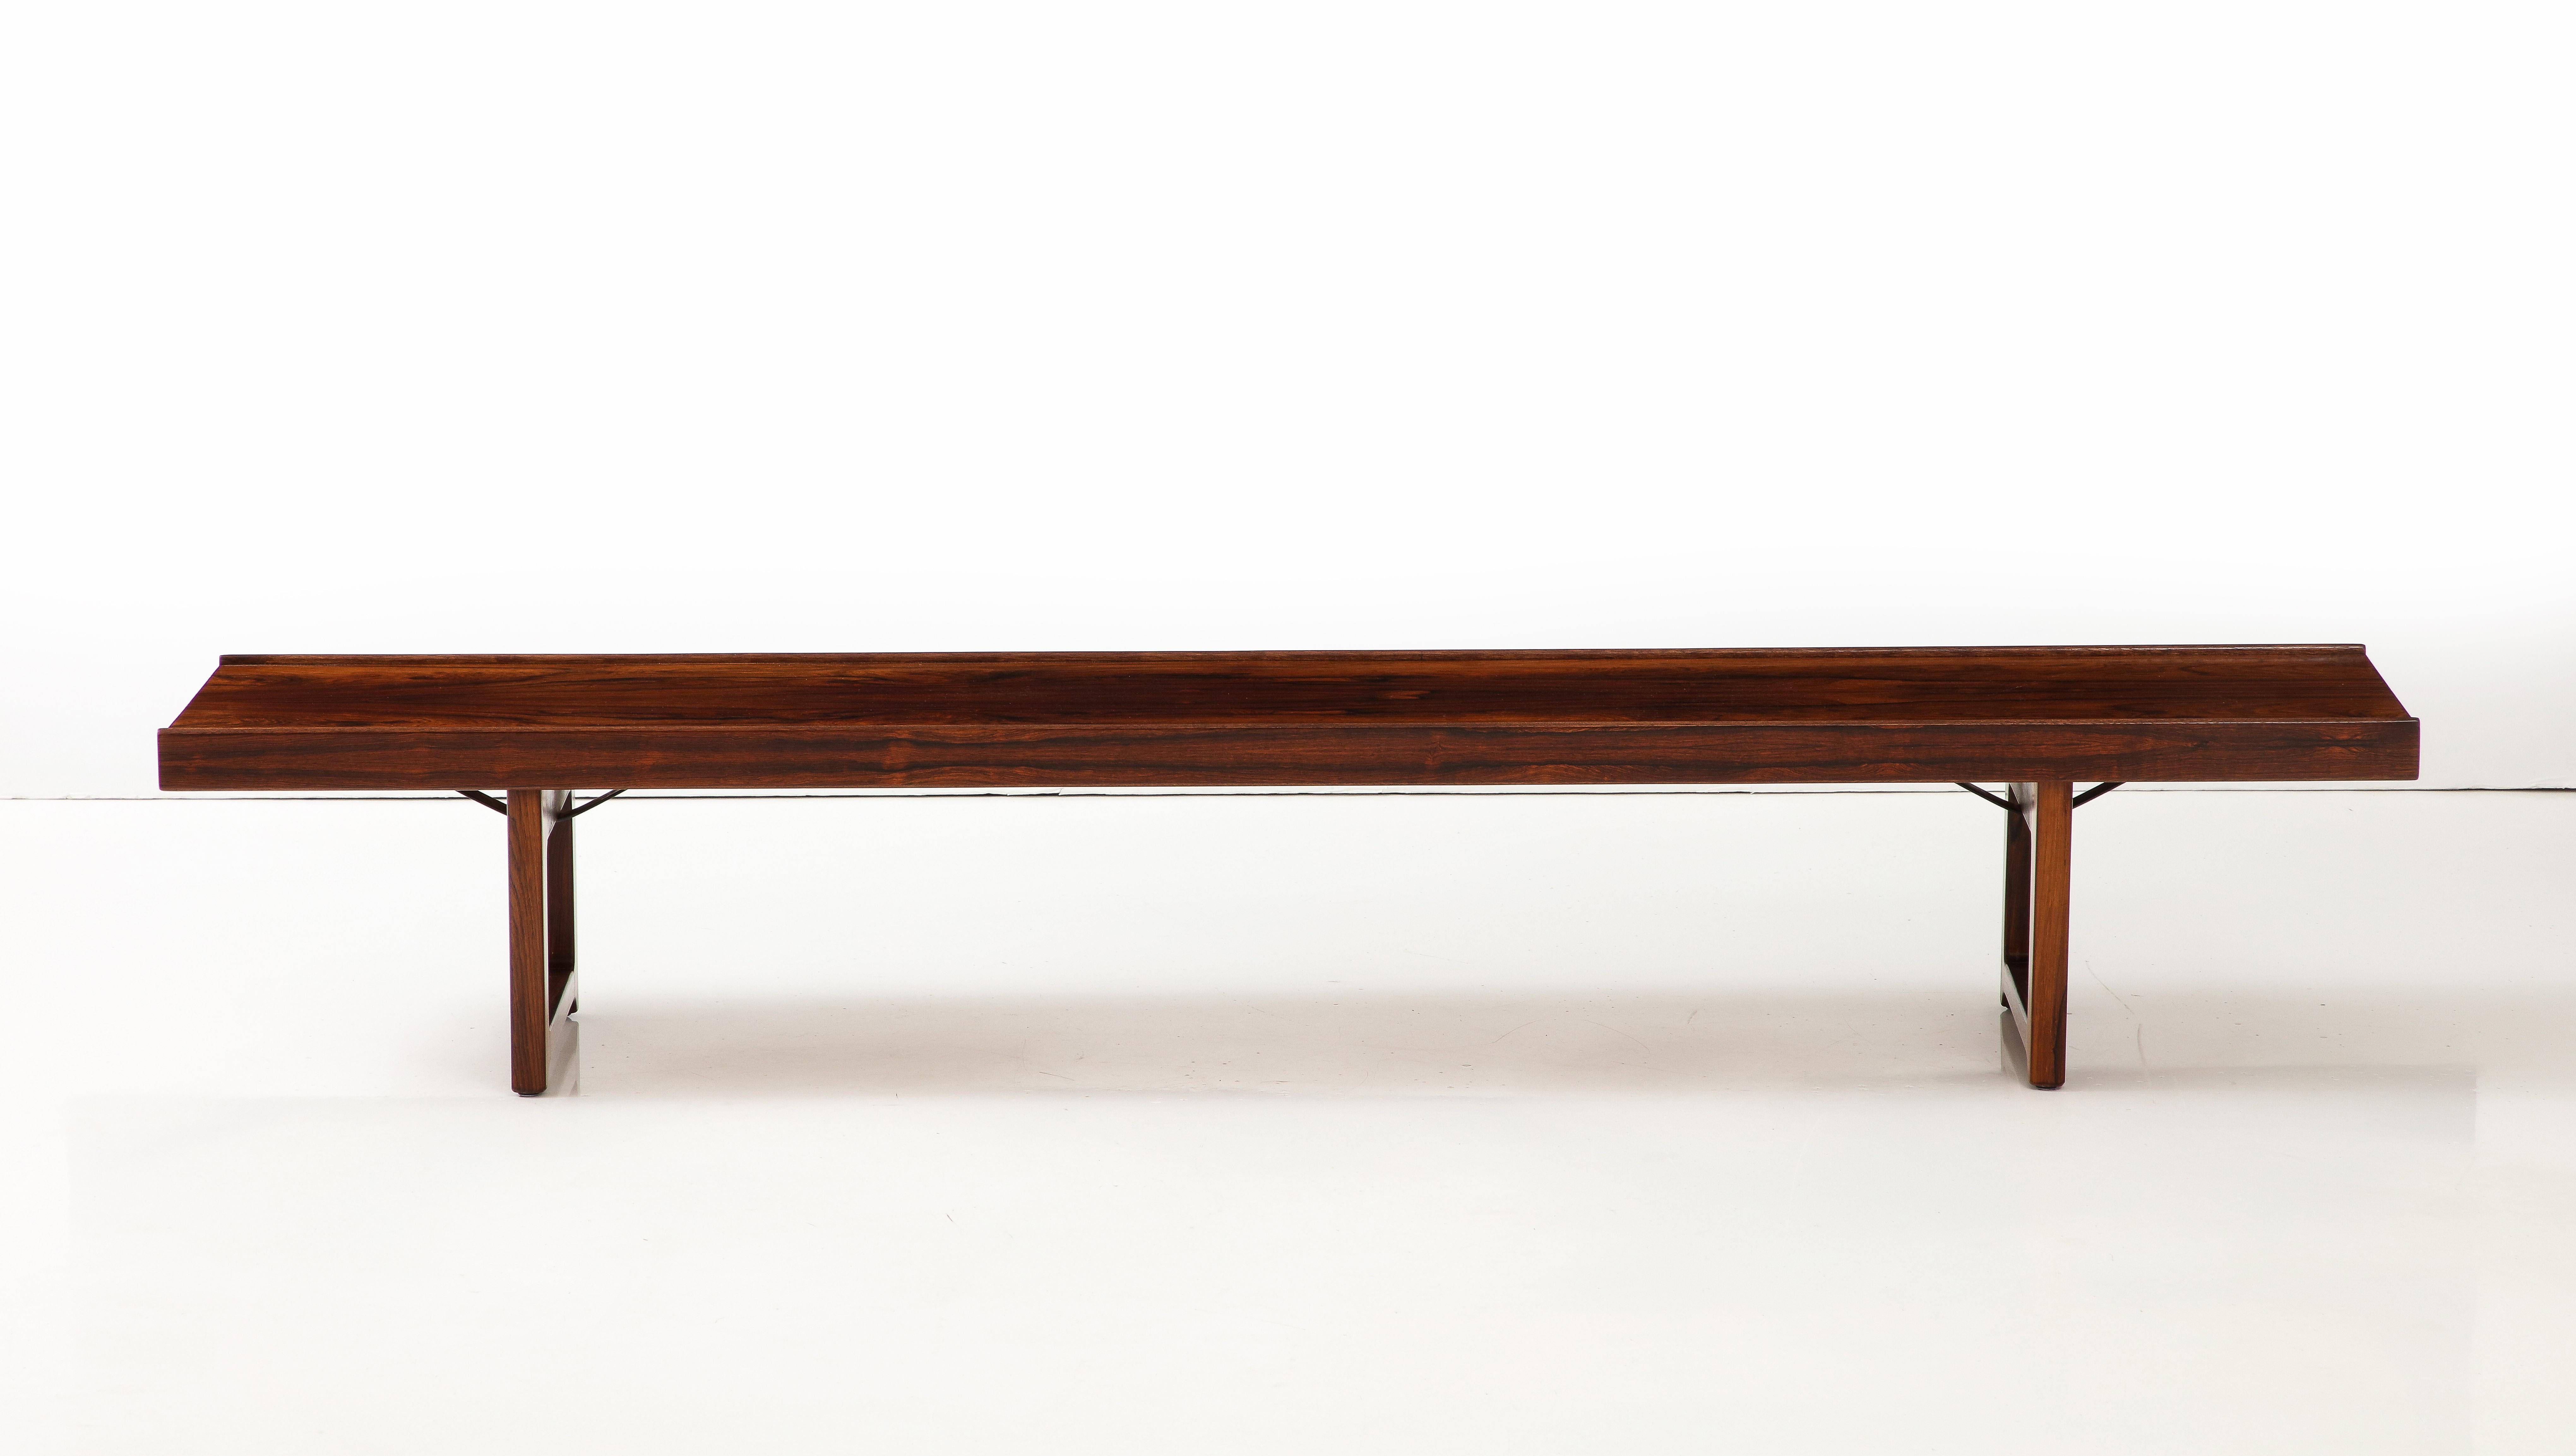 A Norwegian Krobo rosewood long bench or table, Designed by Torbjørn Afdal, Circa 1960s, Manufactured in Norway by Mellemstrands Trevareindustri. the rectangular top with raised outer molding on the sides. Beautiful rosewood grain which is